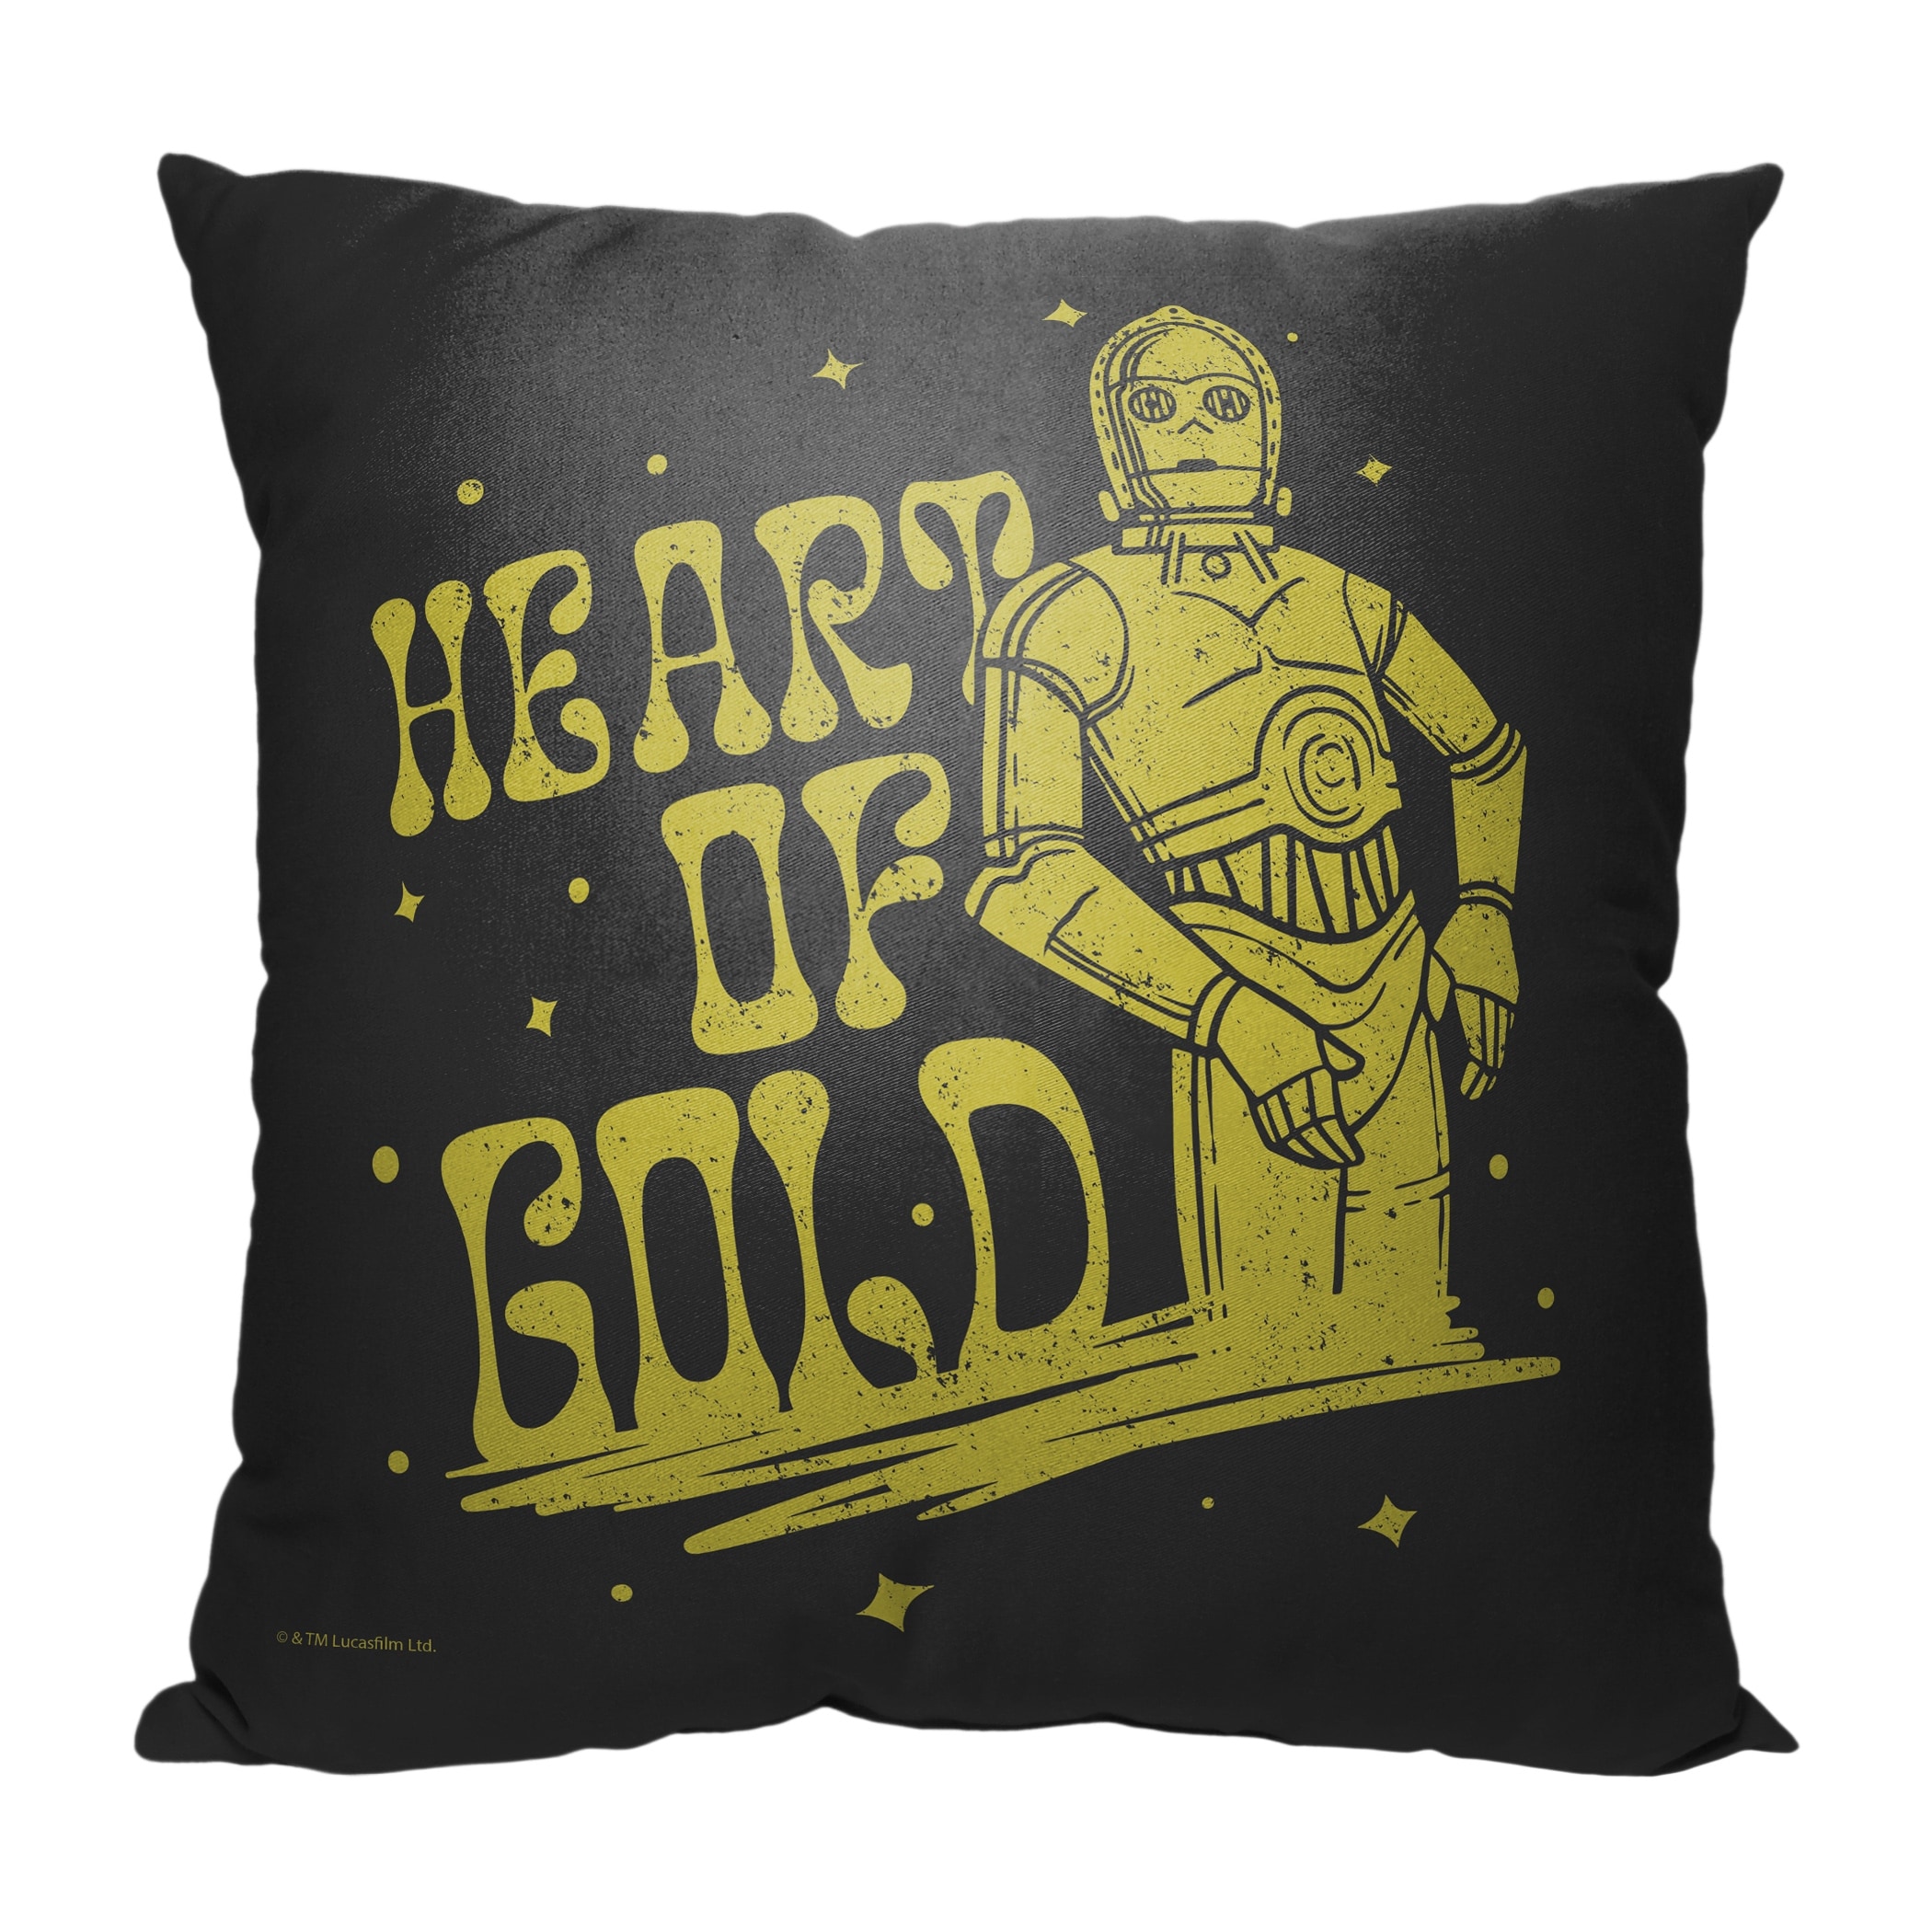 https://ak1.ostkcdn.com/images/products/is/images/direct/25cedcaadf863e27cb57fd11131e6d16fb8fd0a3/Star-Wars---Classic%2C-Heart-Of-Gold-Pillow.jpg